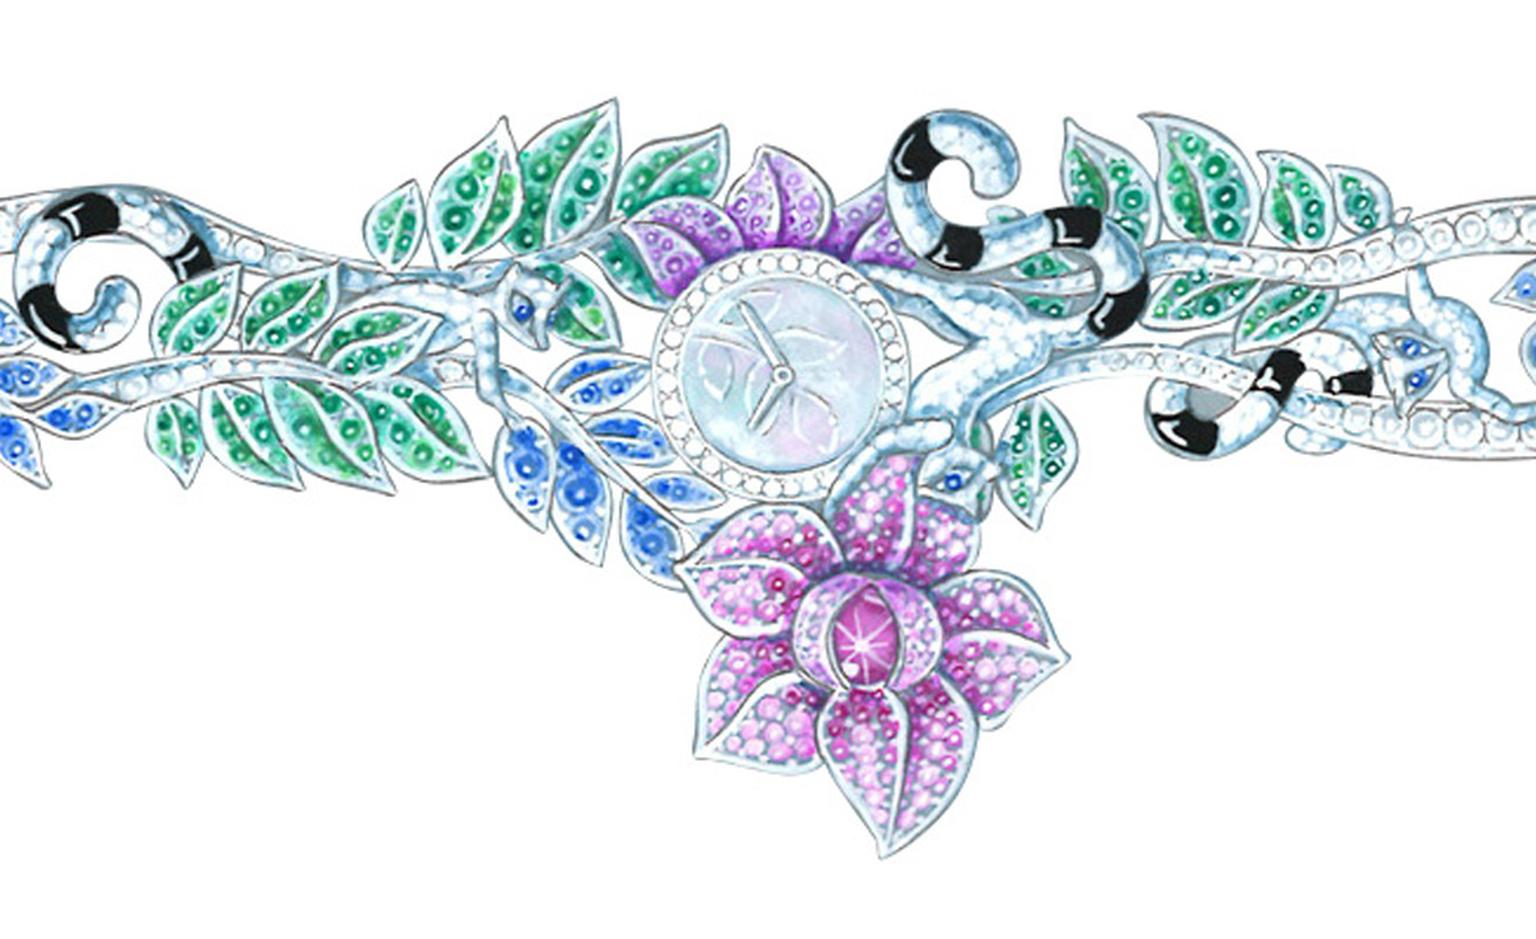 Van Cleef & Arpels Les Voyages Extraordinaires gouache of jewellery watch featuring exotic flora and fauna.